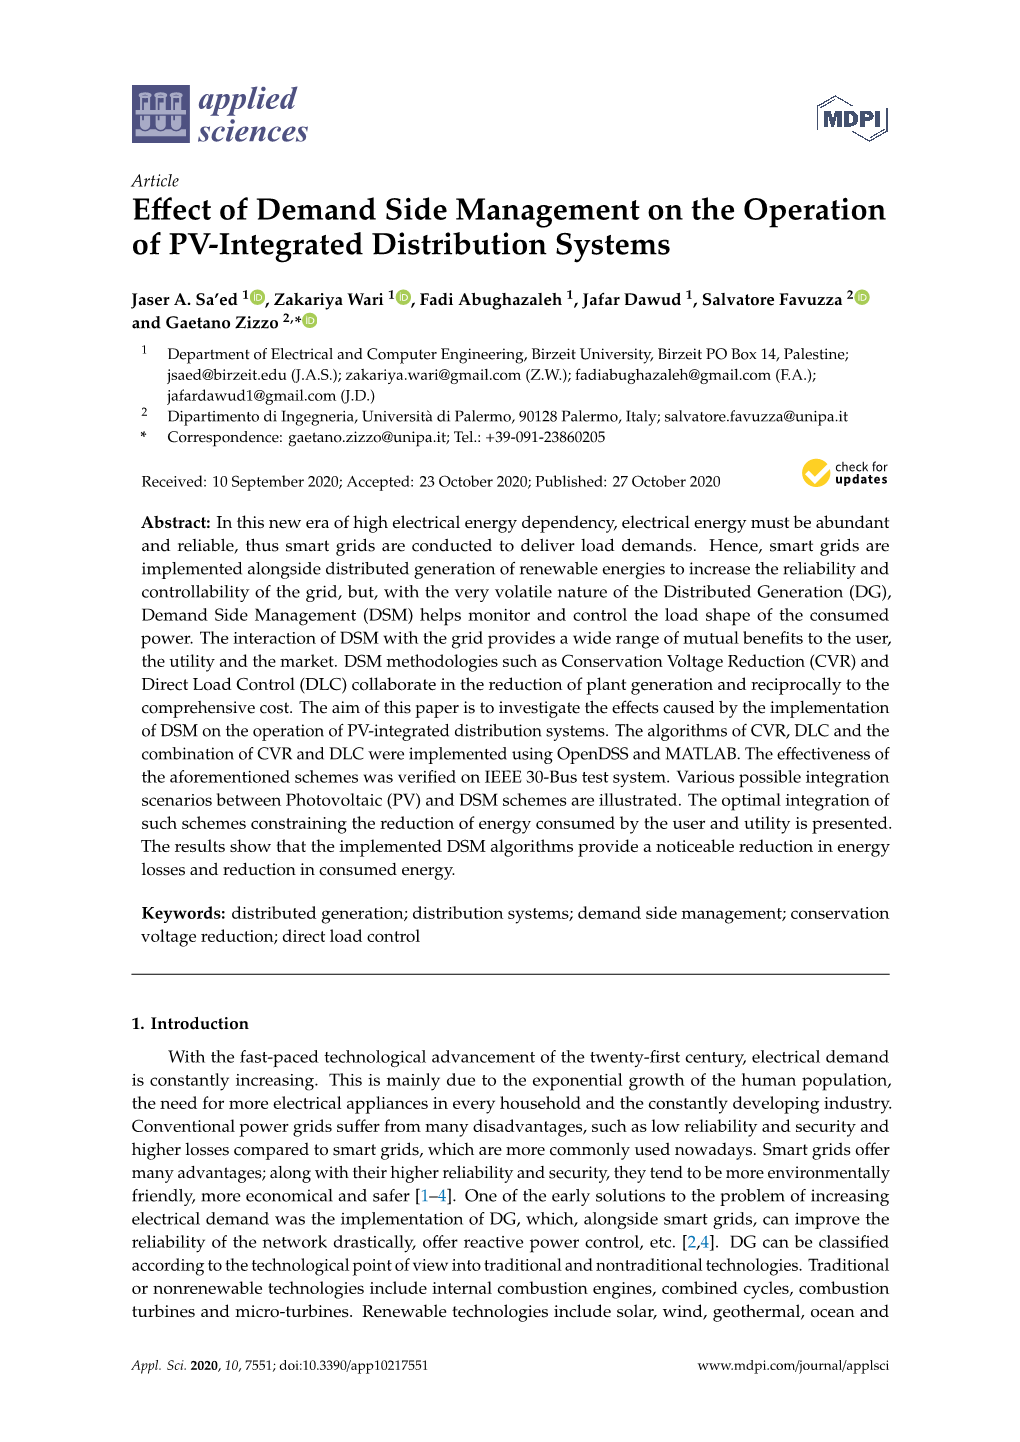 Effect of Demand Side Management on the Operation of PV-Integrated Distribution Systems